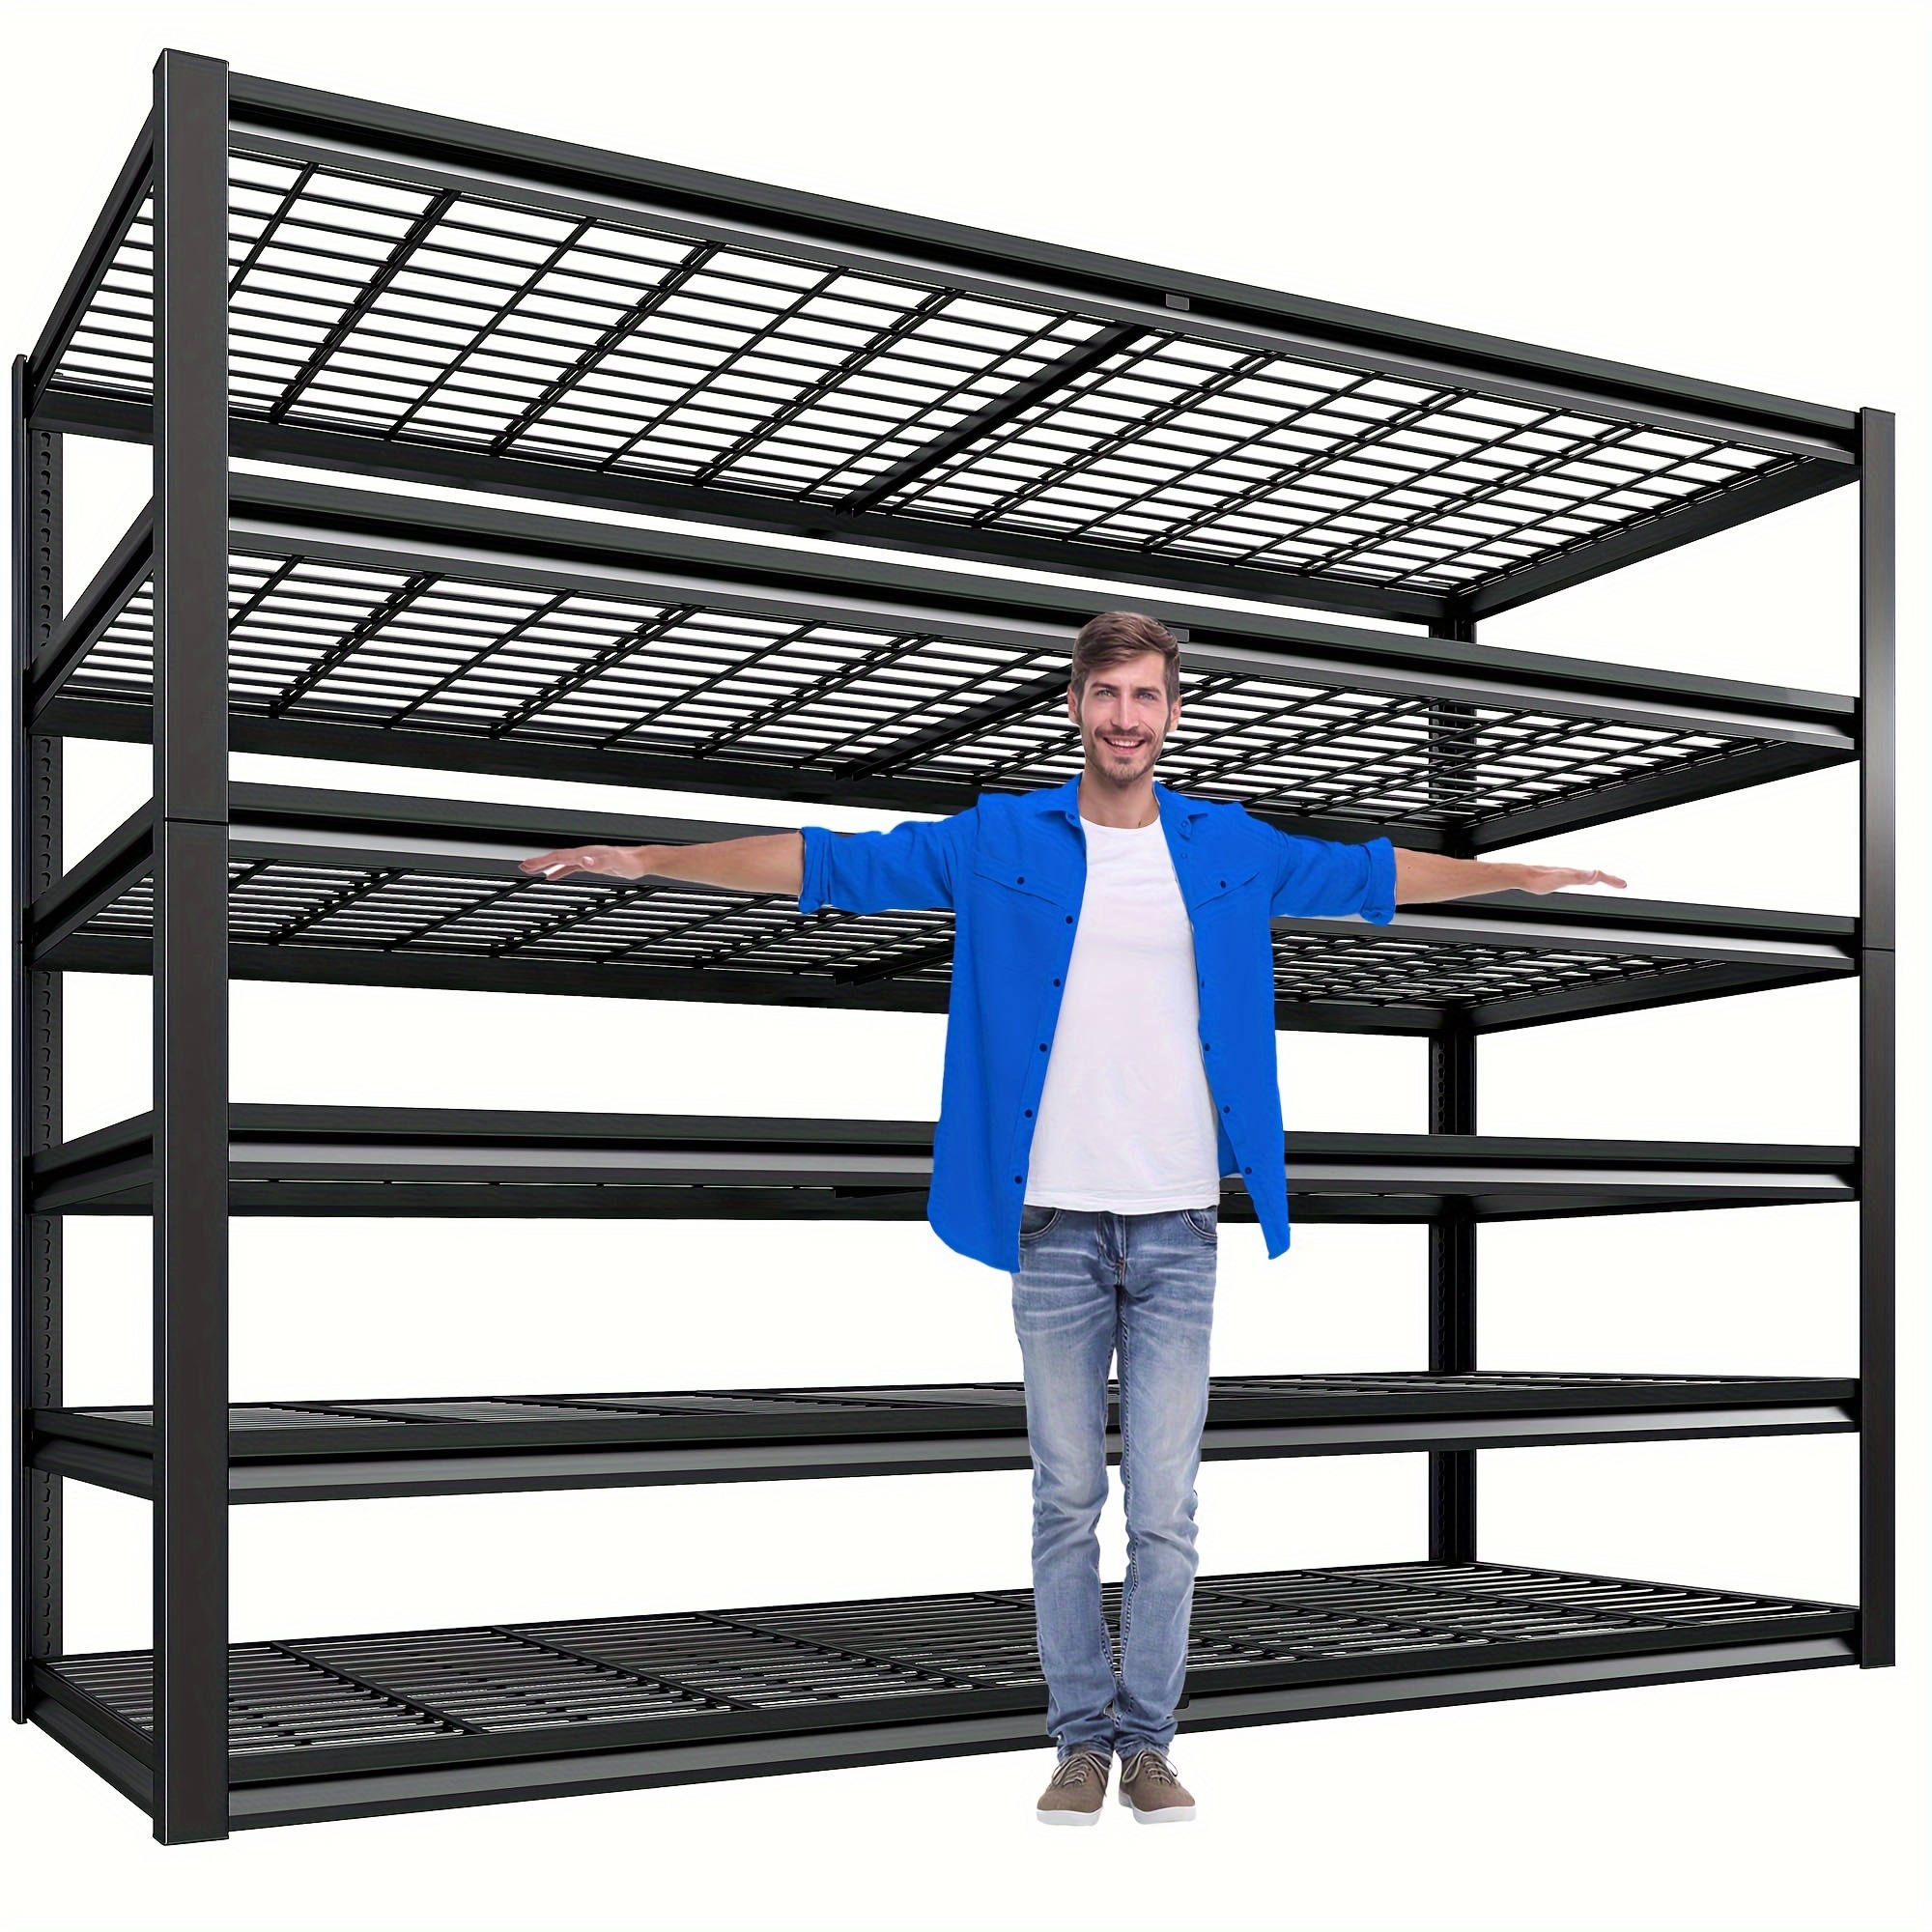 

3500lbs Garage Shelving Storage Shelves Heavy Duty Shelving, 55"w X26"d X84"h Metal Shelves With 6 Tier Adjustable Shelving Units And Storage Rack For Warehouse Commercial Pantry Garage Shelves